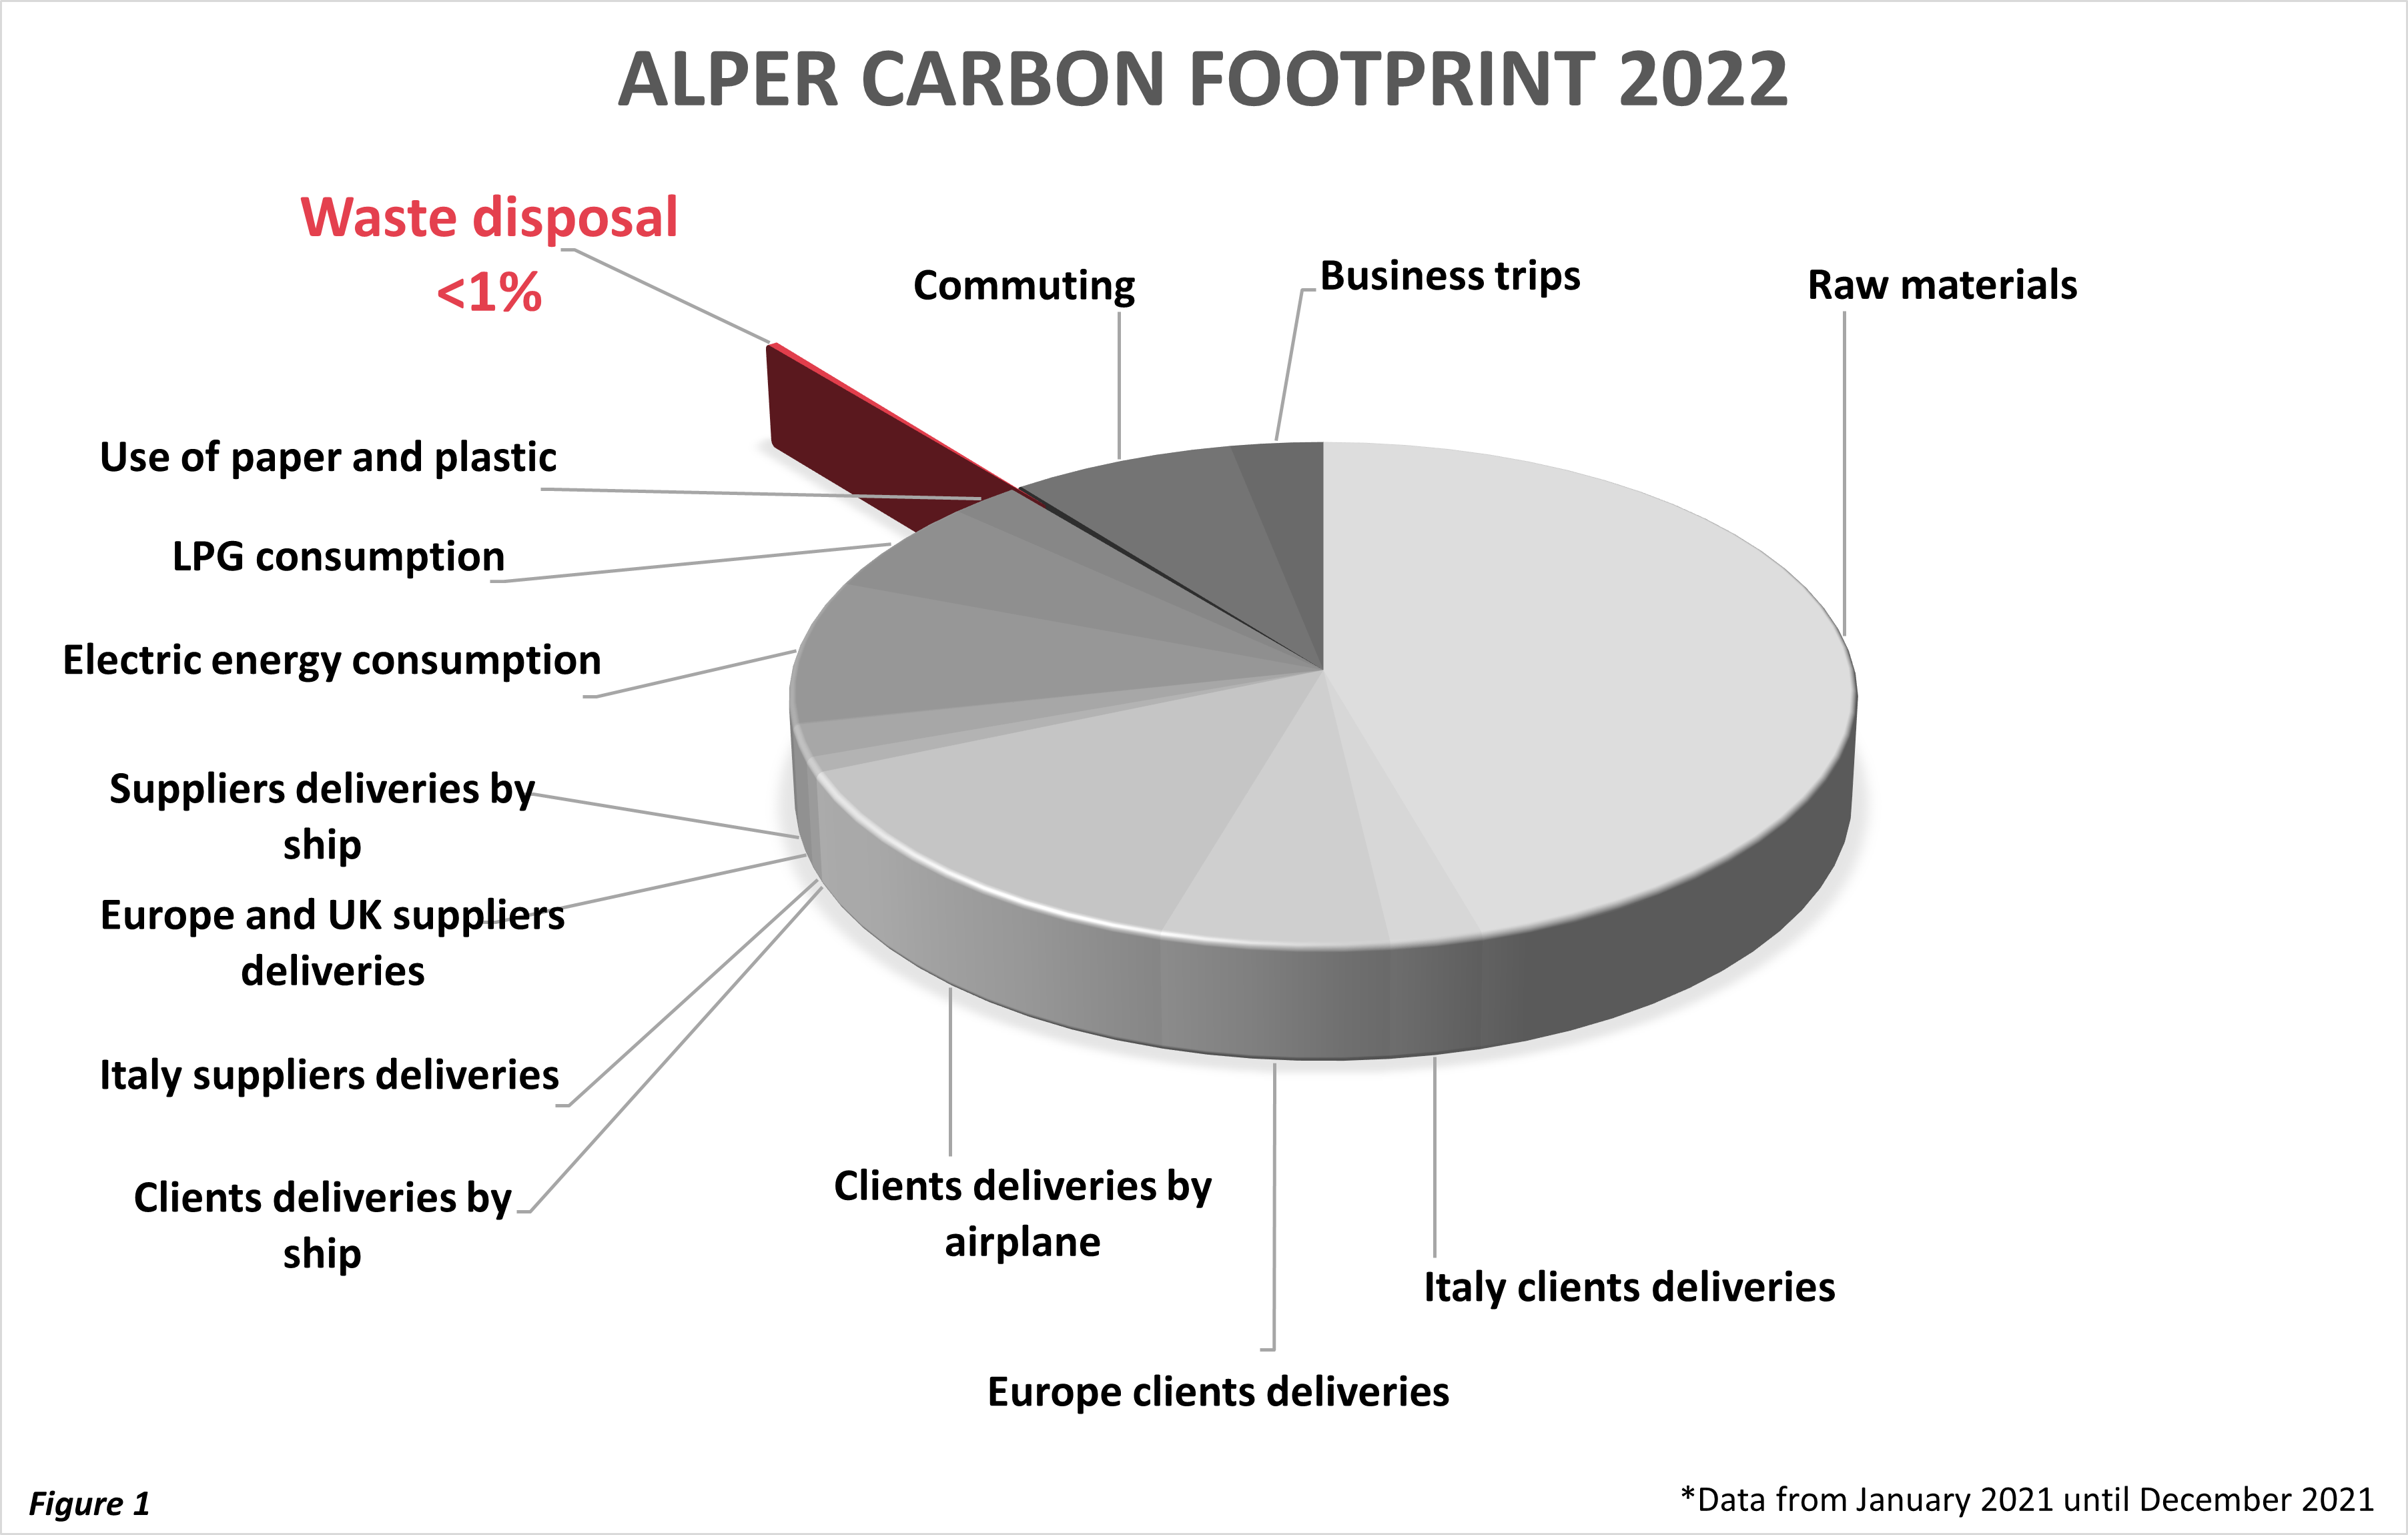 ALPER for the sustainability- carbon footprint